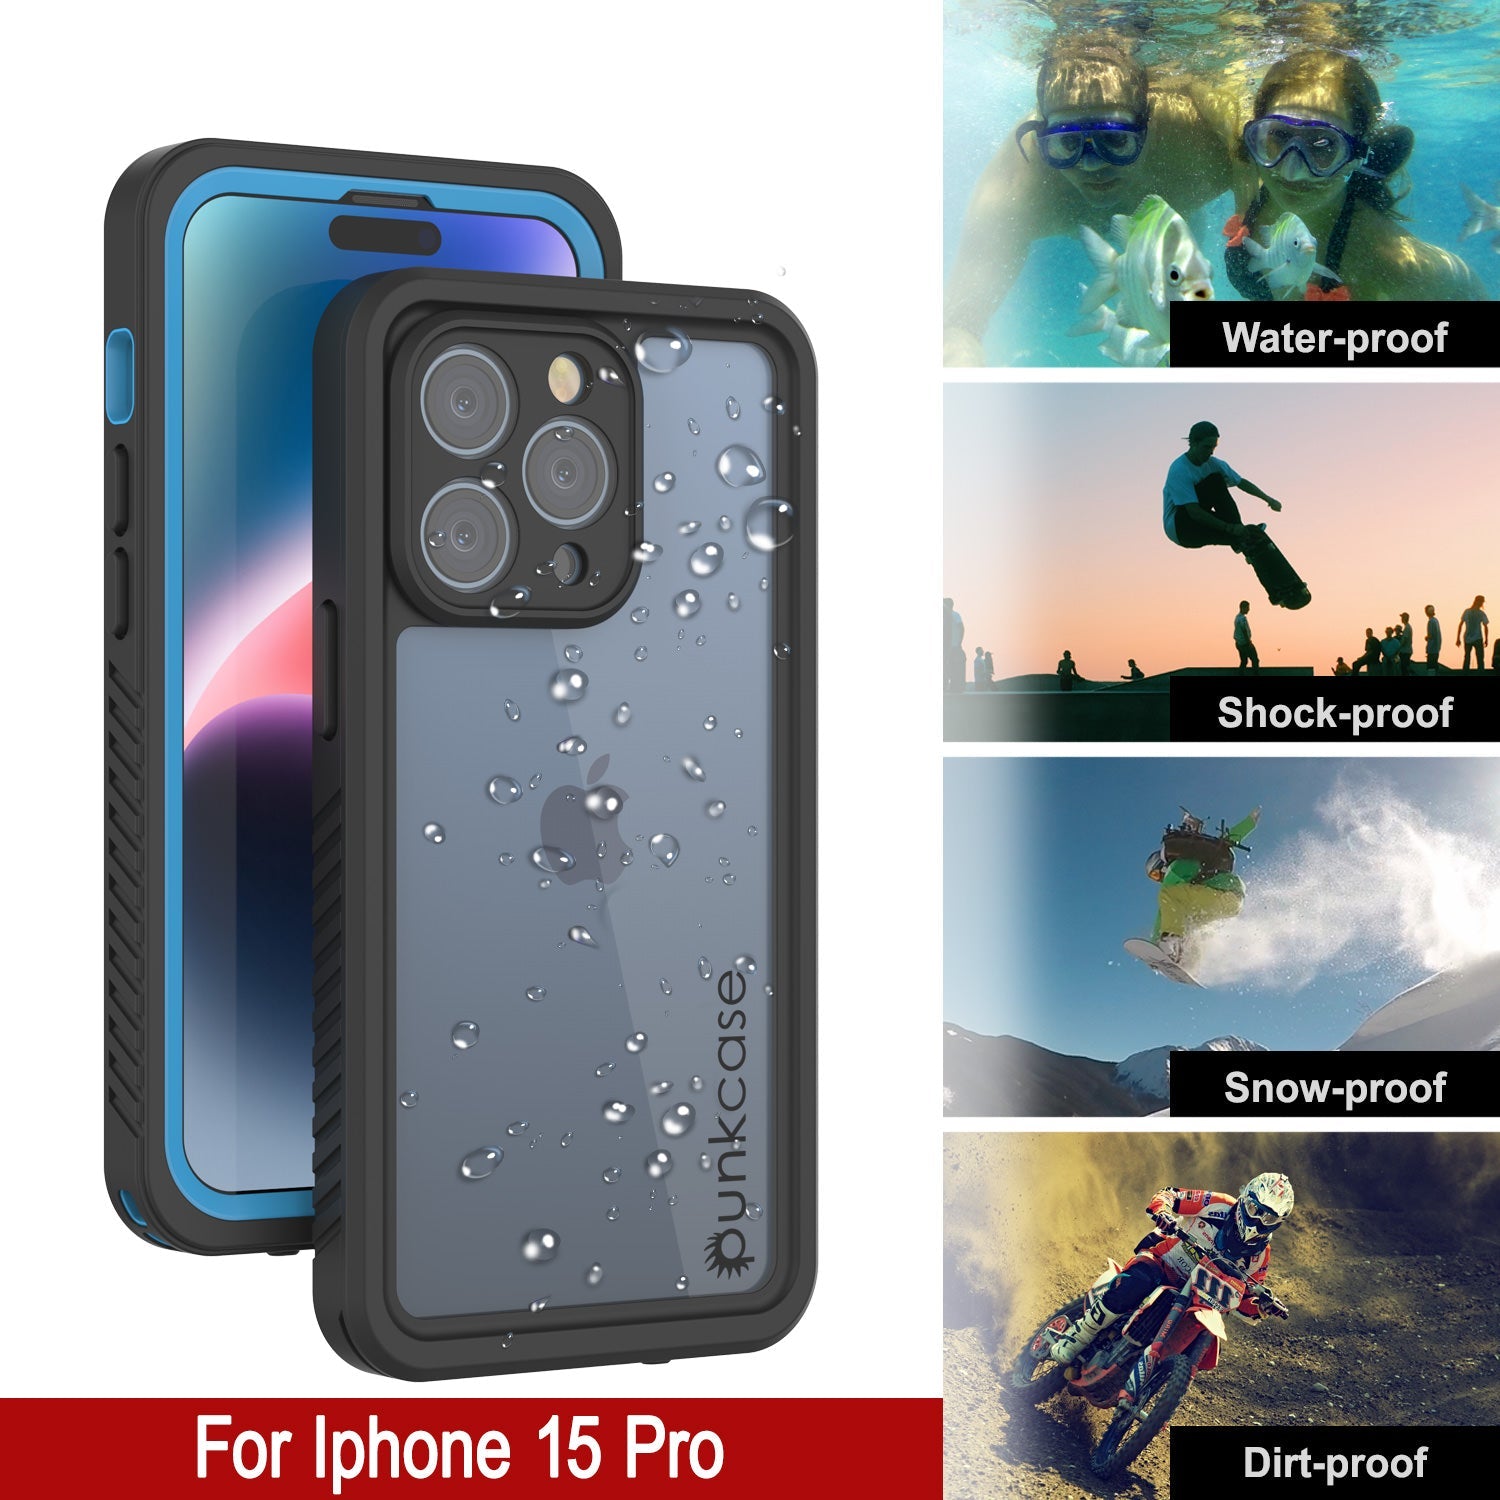 iPhone 15 Pro Waterproof Case, Punkcase [Extreme Series] Armor Cover W/ Built In Screen Protector [Light Blue]